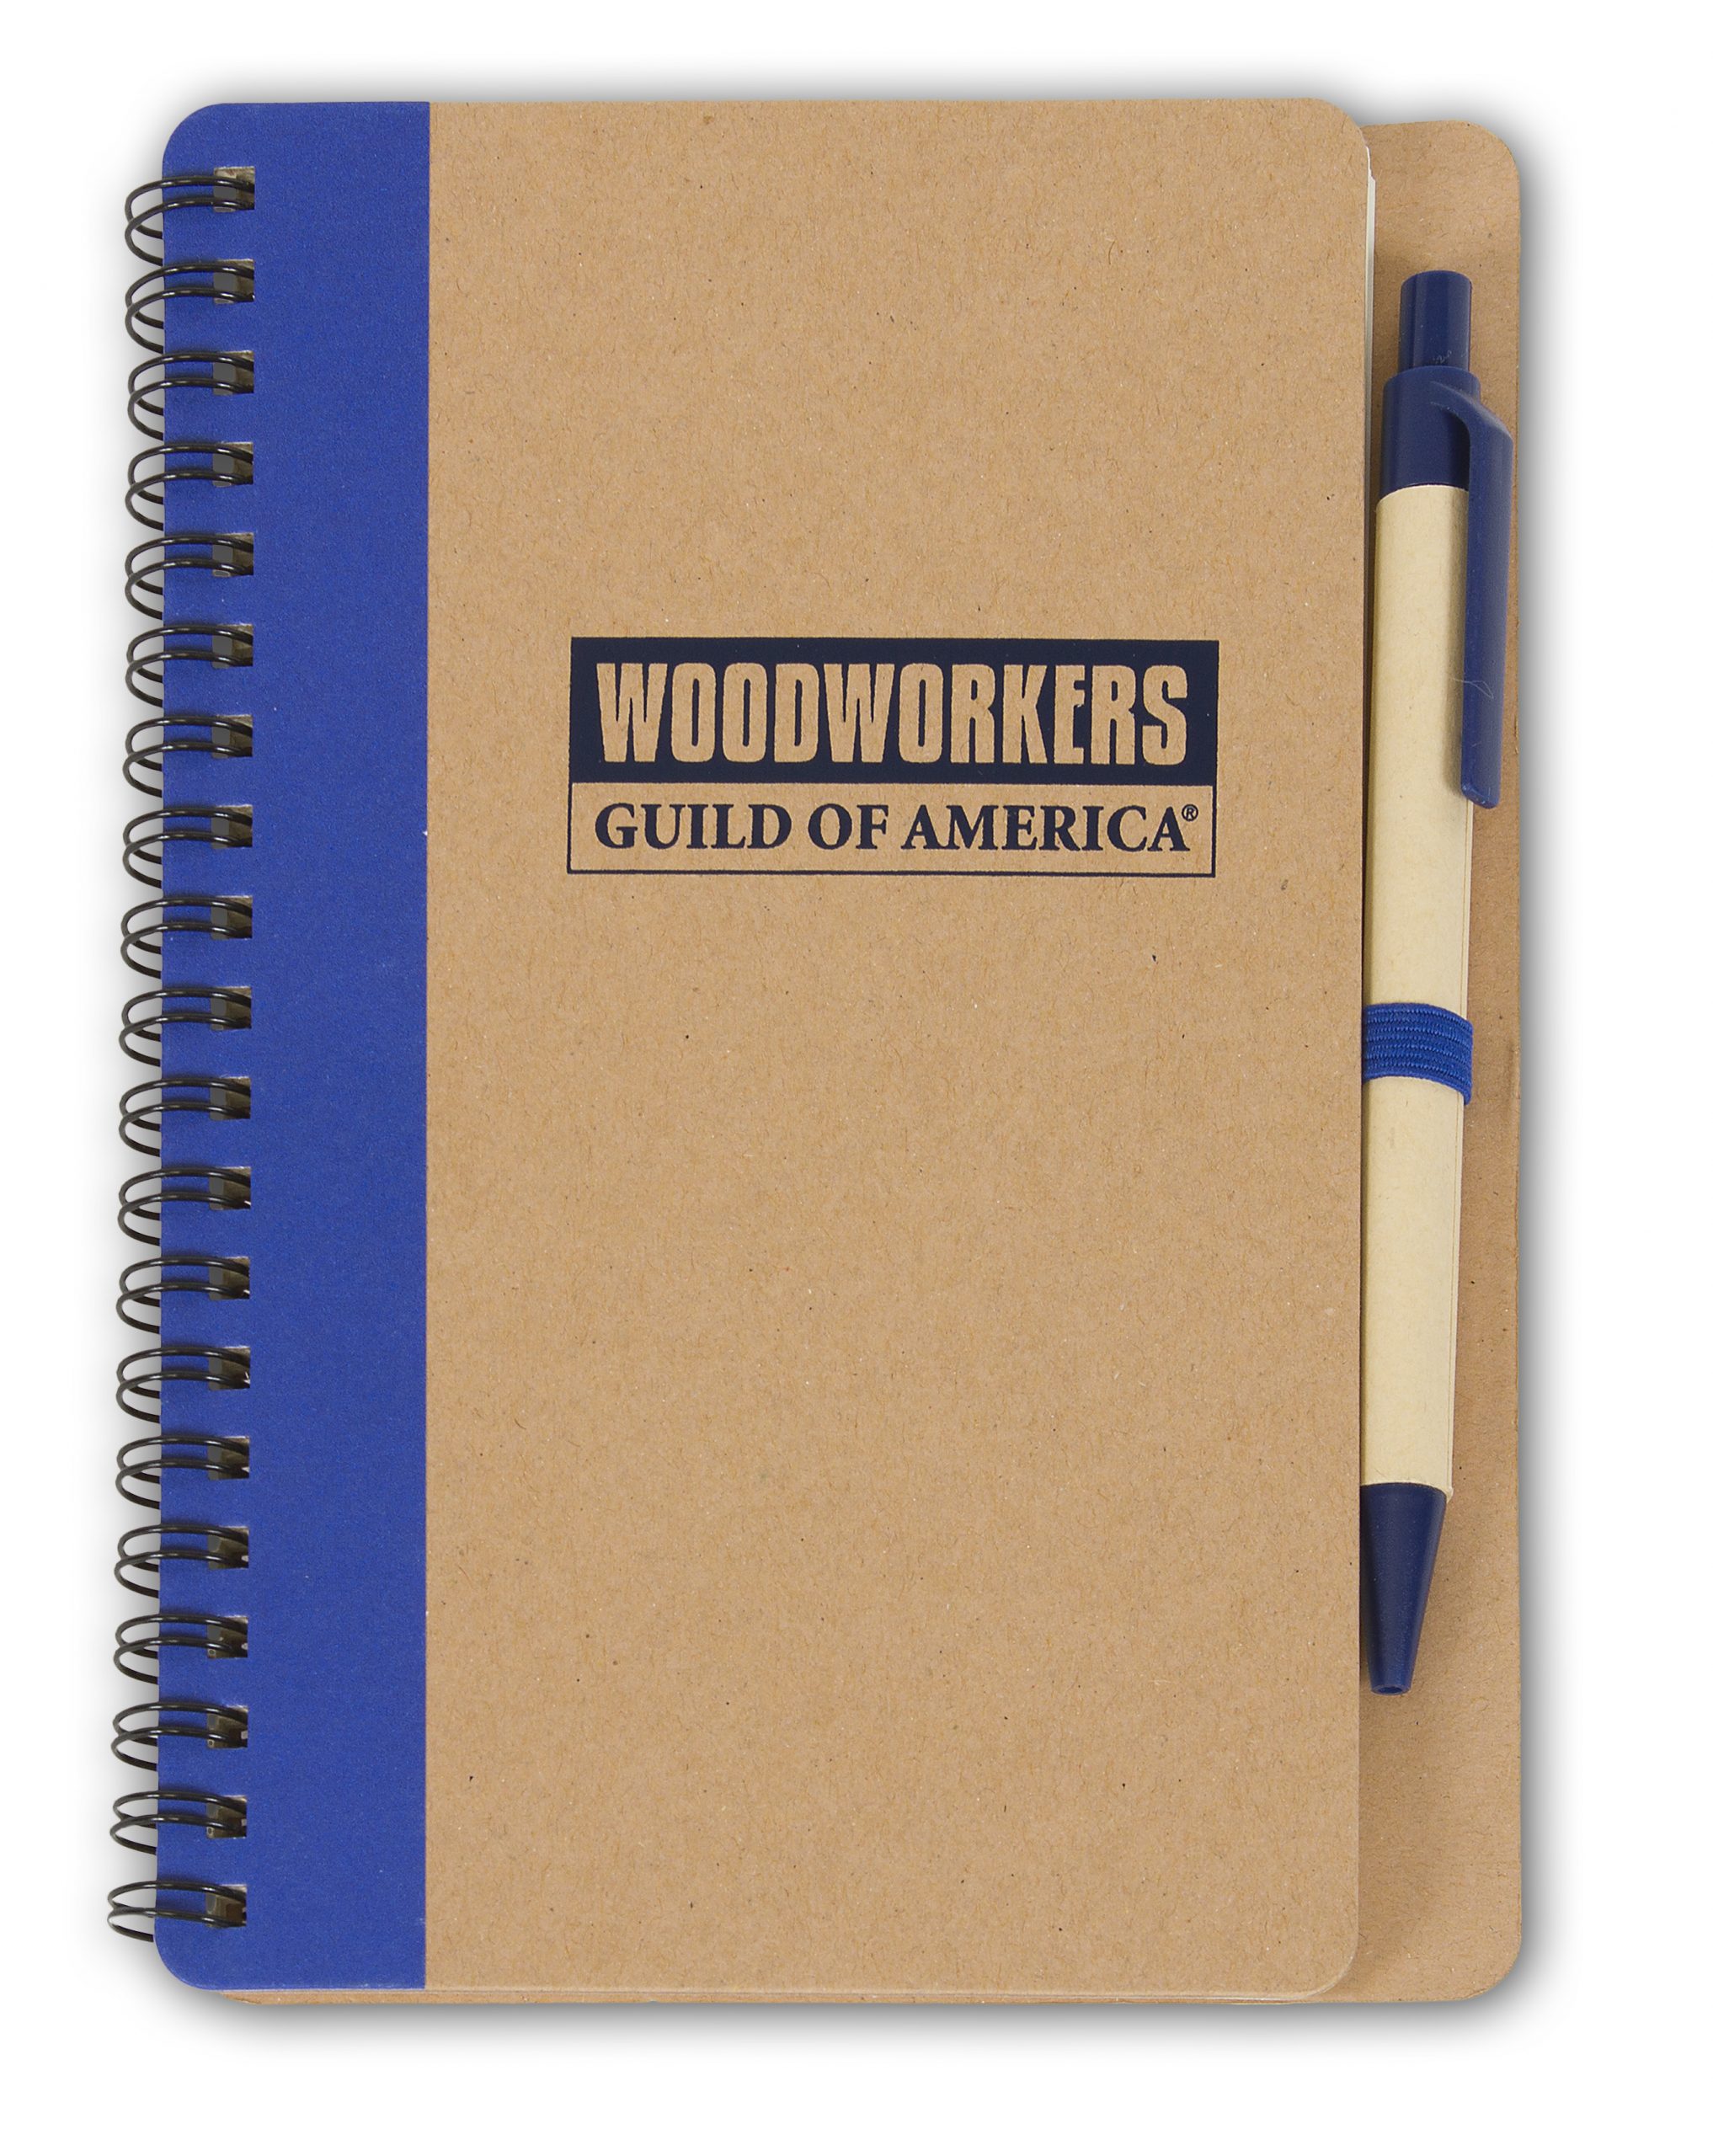 Woodworkers guild of America Notebook